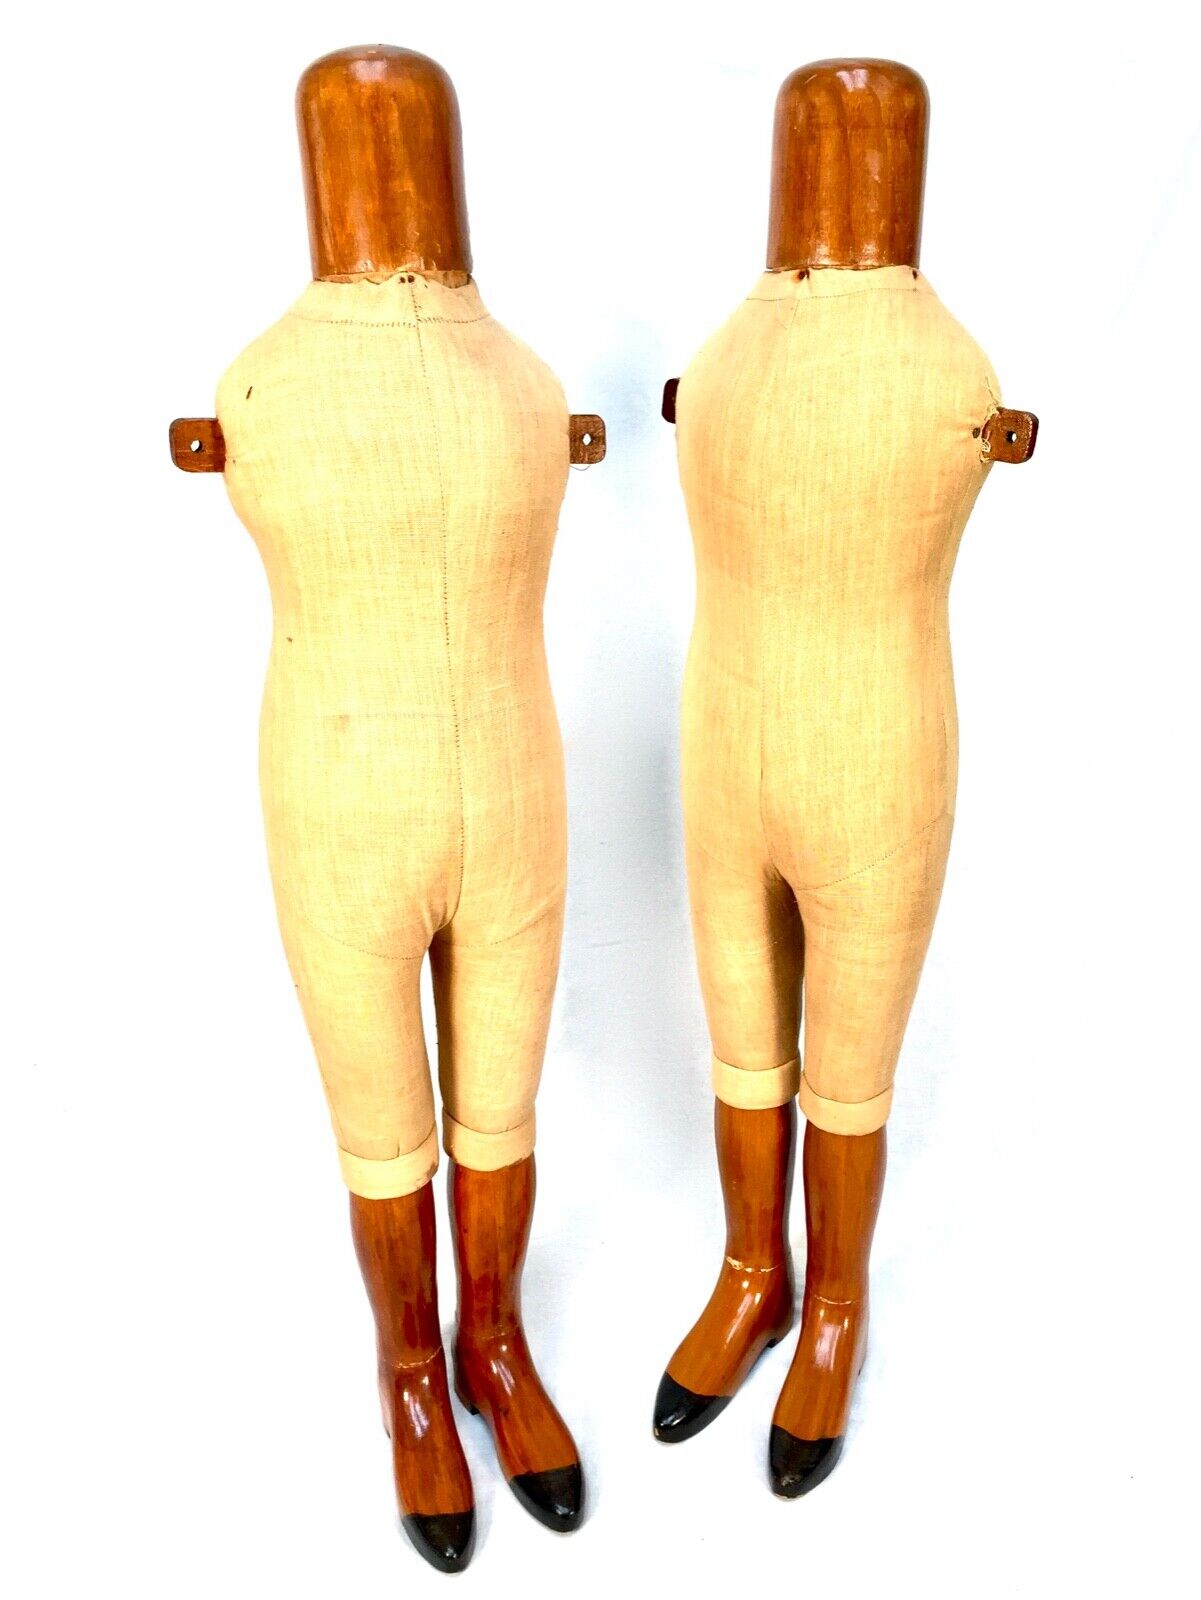 Pair of Antique Advertising Shop Display Wooden Mannequins / Clothes Stands